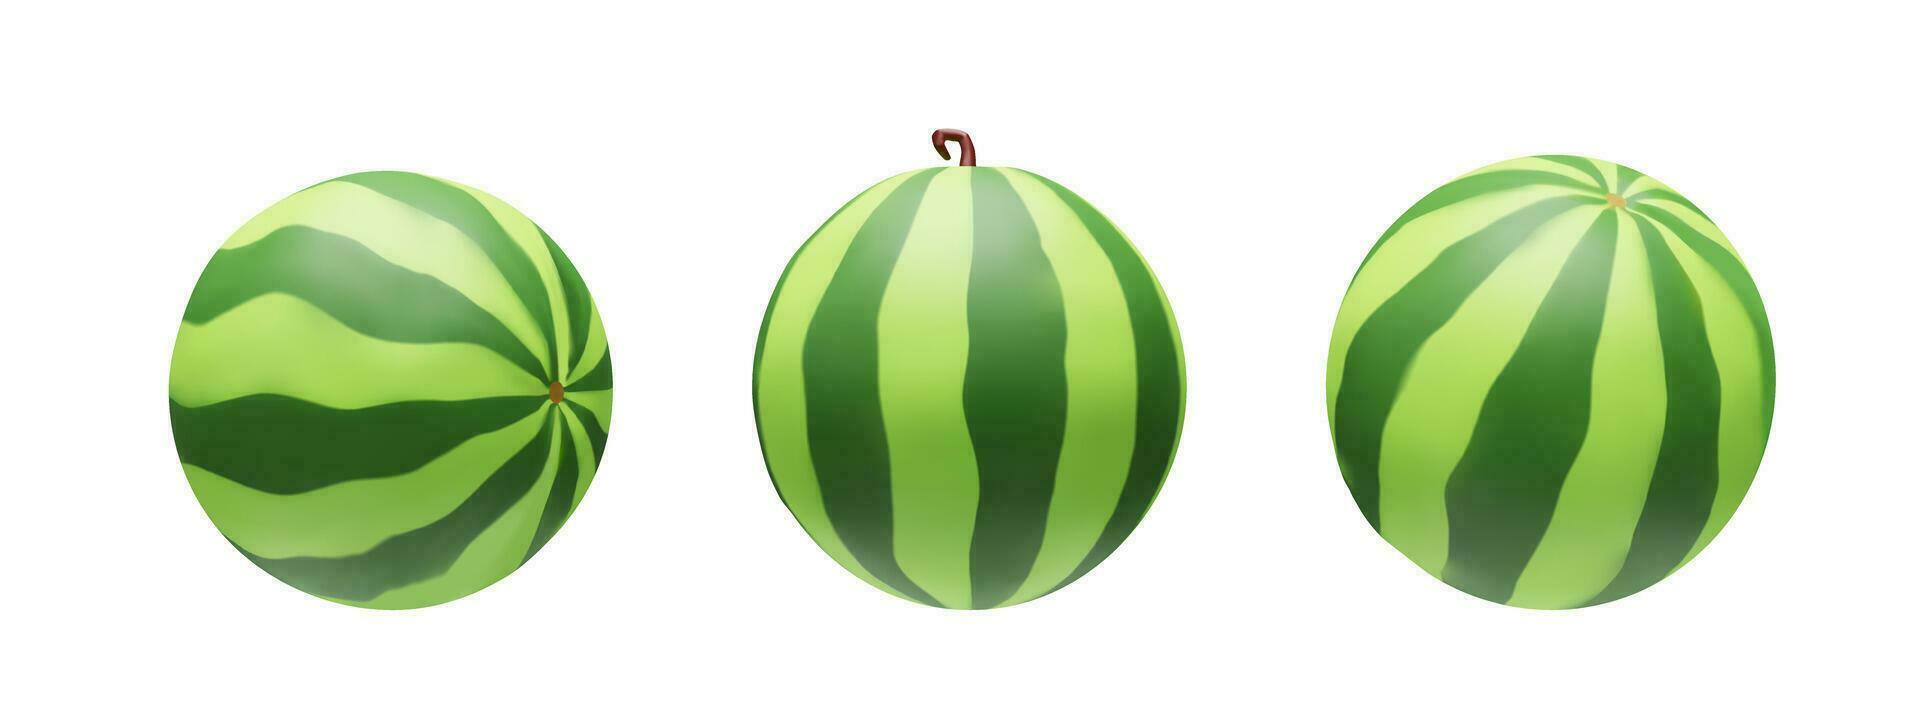 Set of 3D render watermelon. Realistic healthy berry. Vector illustration in clay style. Sweet ripe organic food for vegetarian. Juicy fresh snack in summer season. Tasty nutrition object in plastic